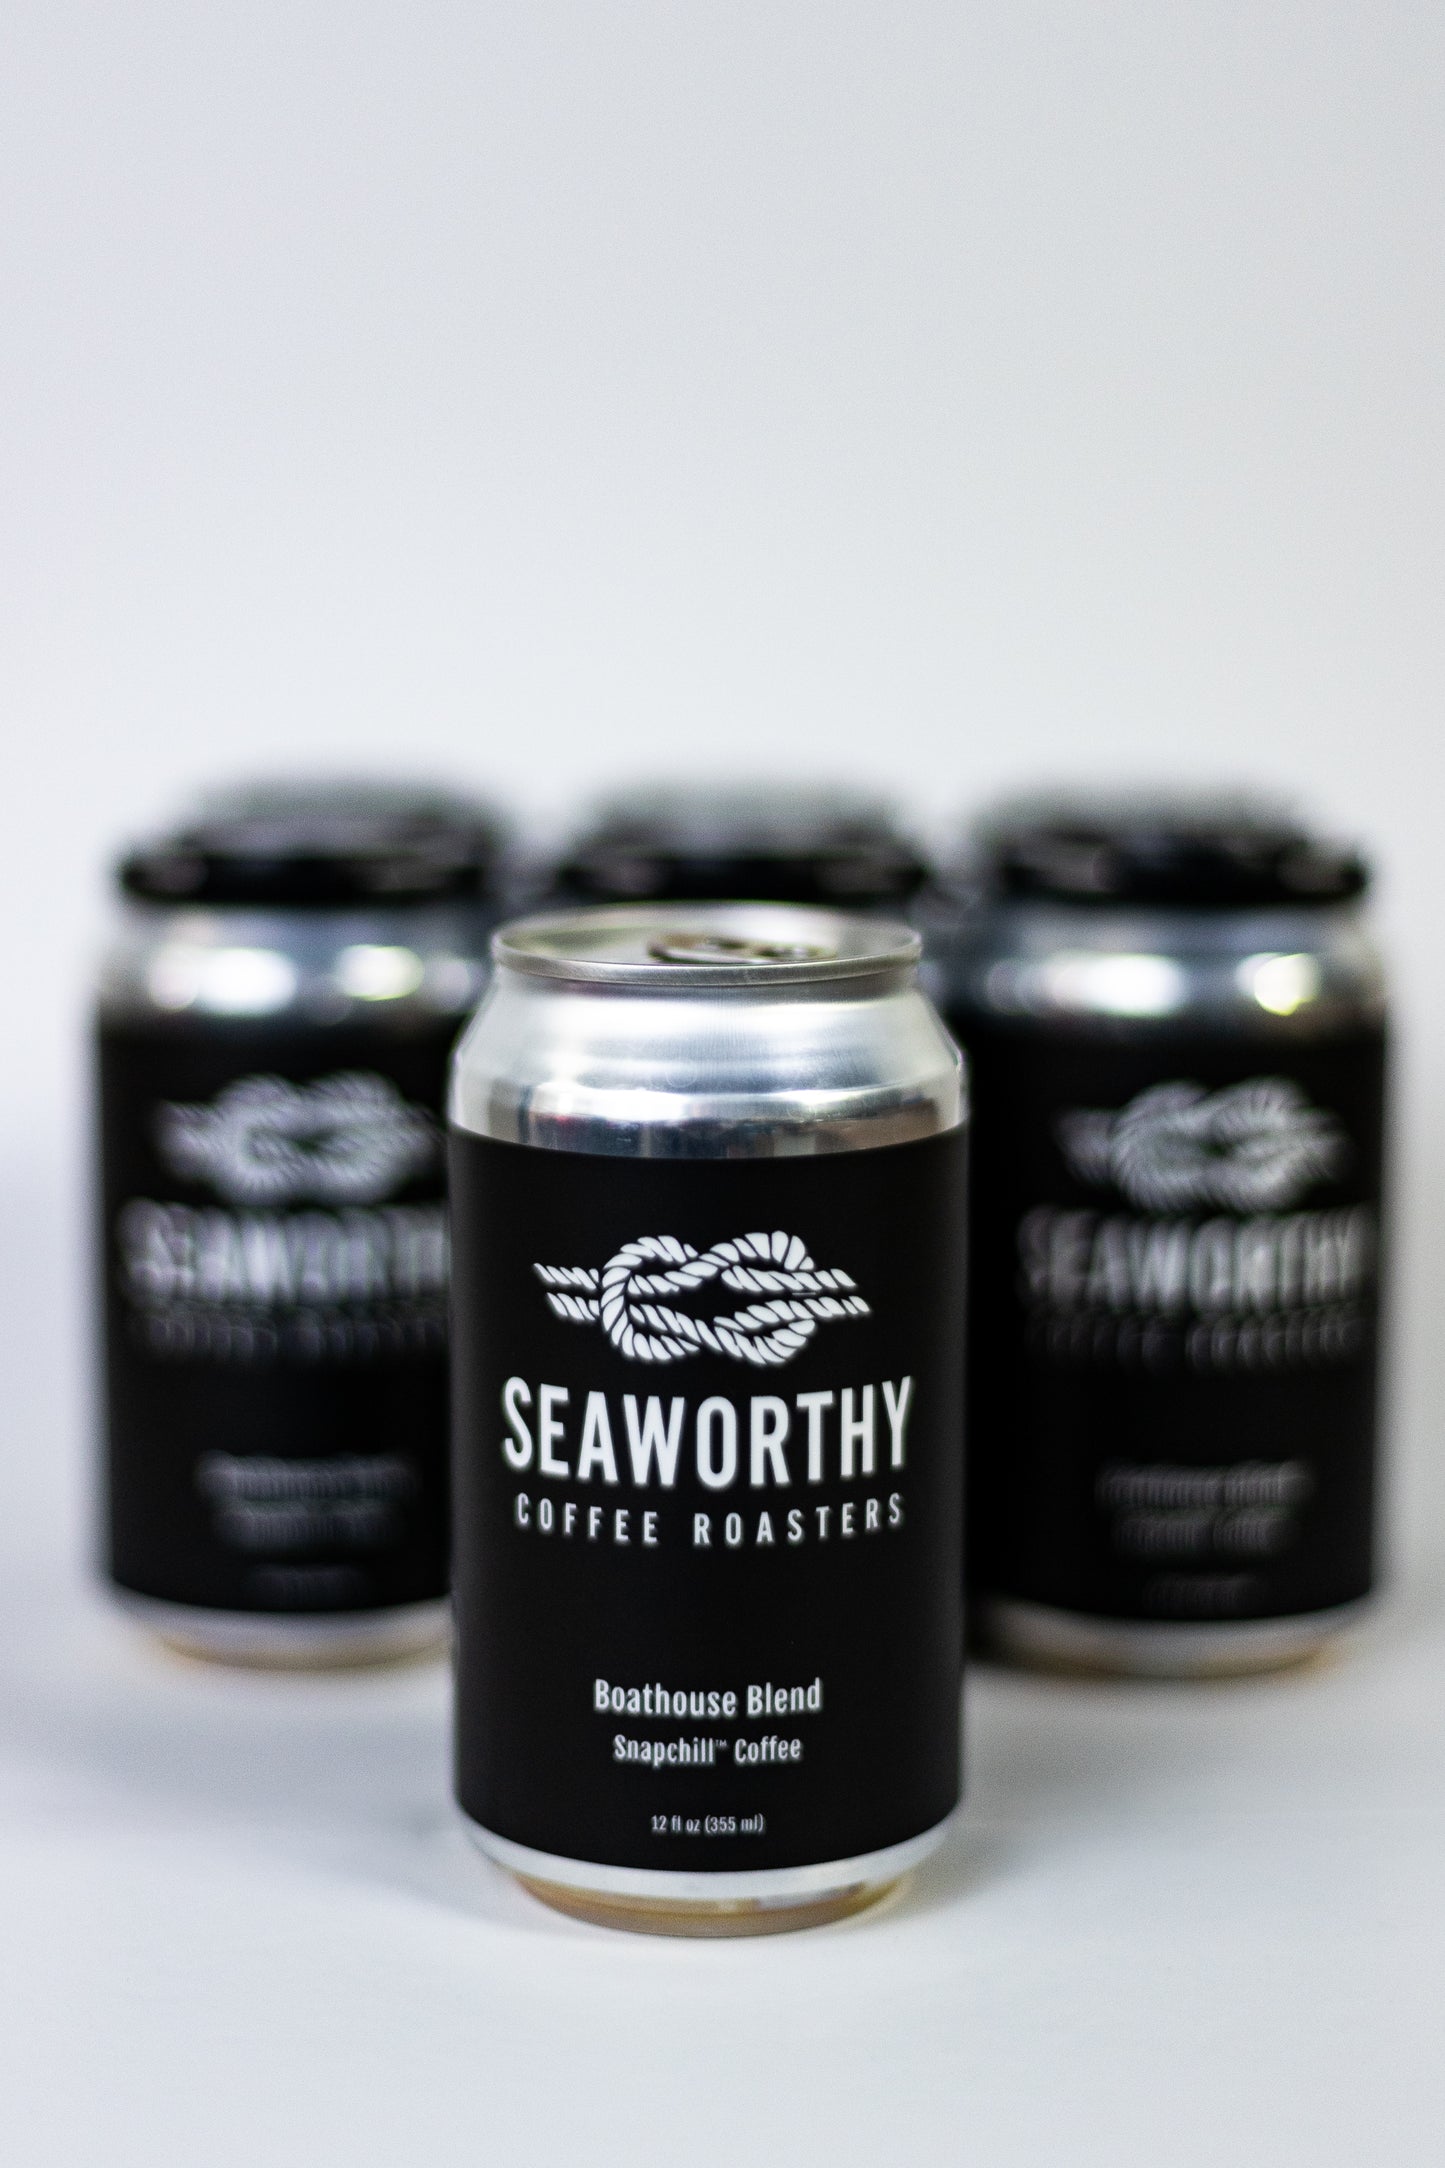 Grab and go! Seaworthy Snapchill Cans are the most convenient and delicious way to enjoy your Seaworthy Slow Roasted Coffee! Our slow roasted Boathouse Blend coffee is first brewed hot and then chilled instantly to preserve all the delicious and nuanced flavor of hot brewed coffee while delivering a crispy cold, delicious coffee drink in a can! Grab a 6 pack today! These cans can be stored at room temp and are best enjoyed cold.